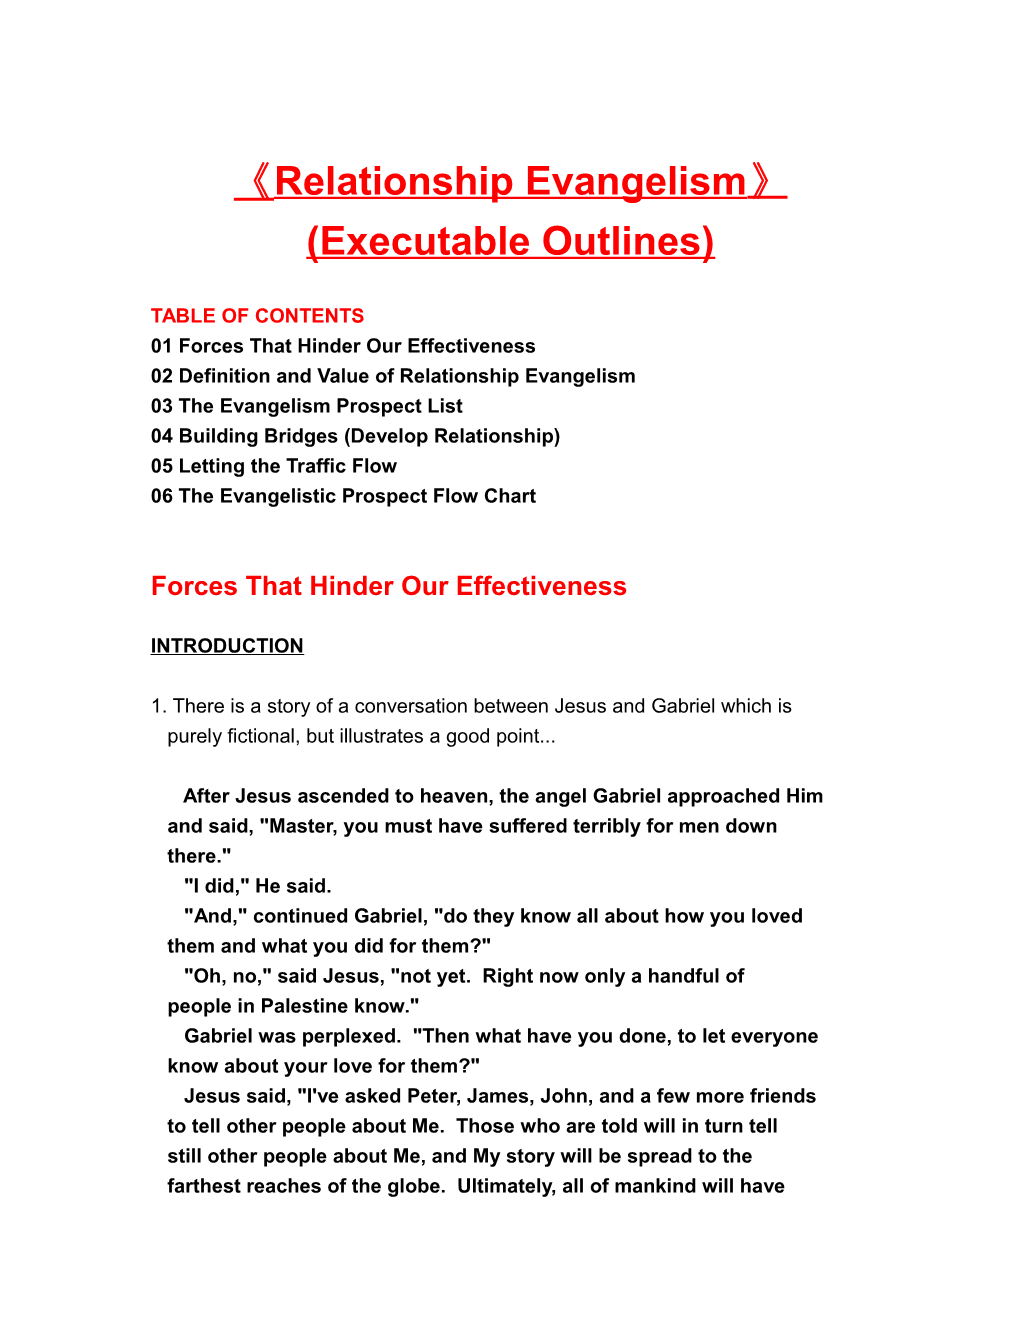 Relationship Evangelism (Executable Outlines)